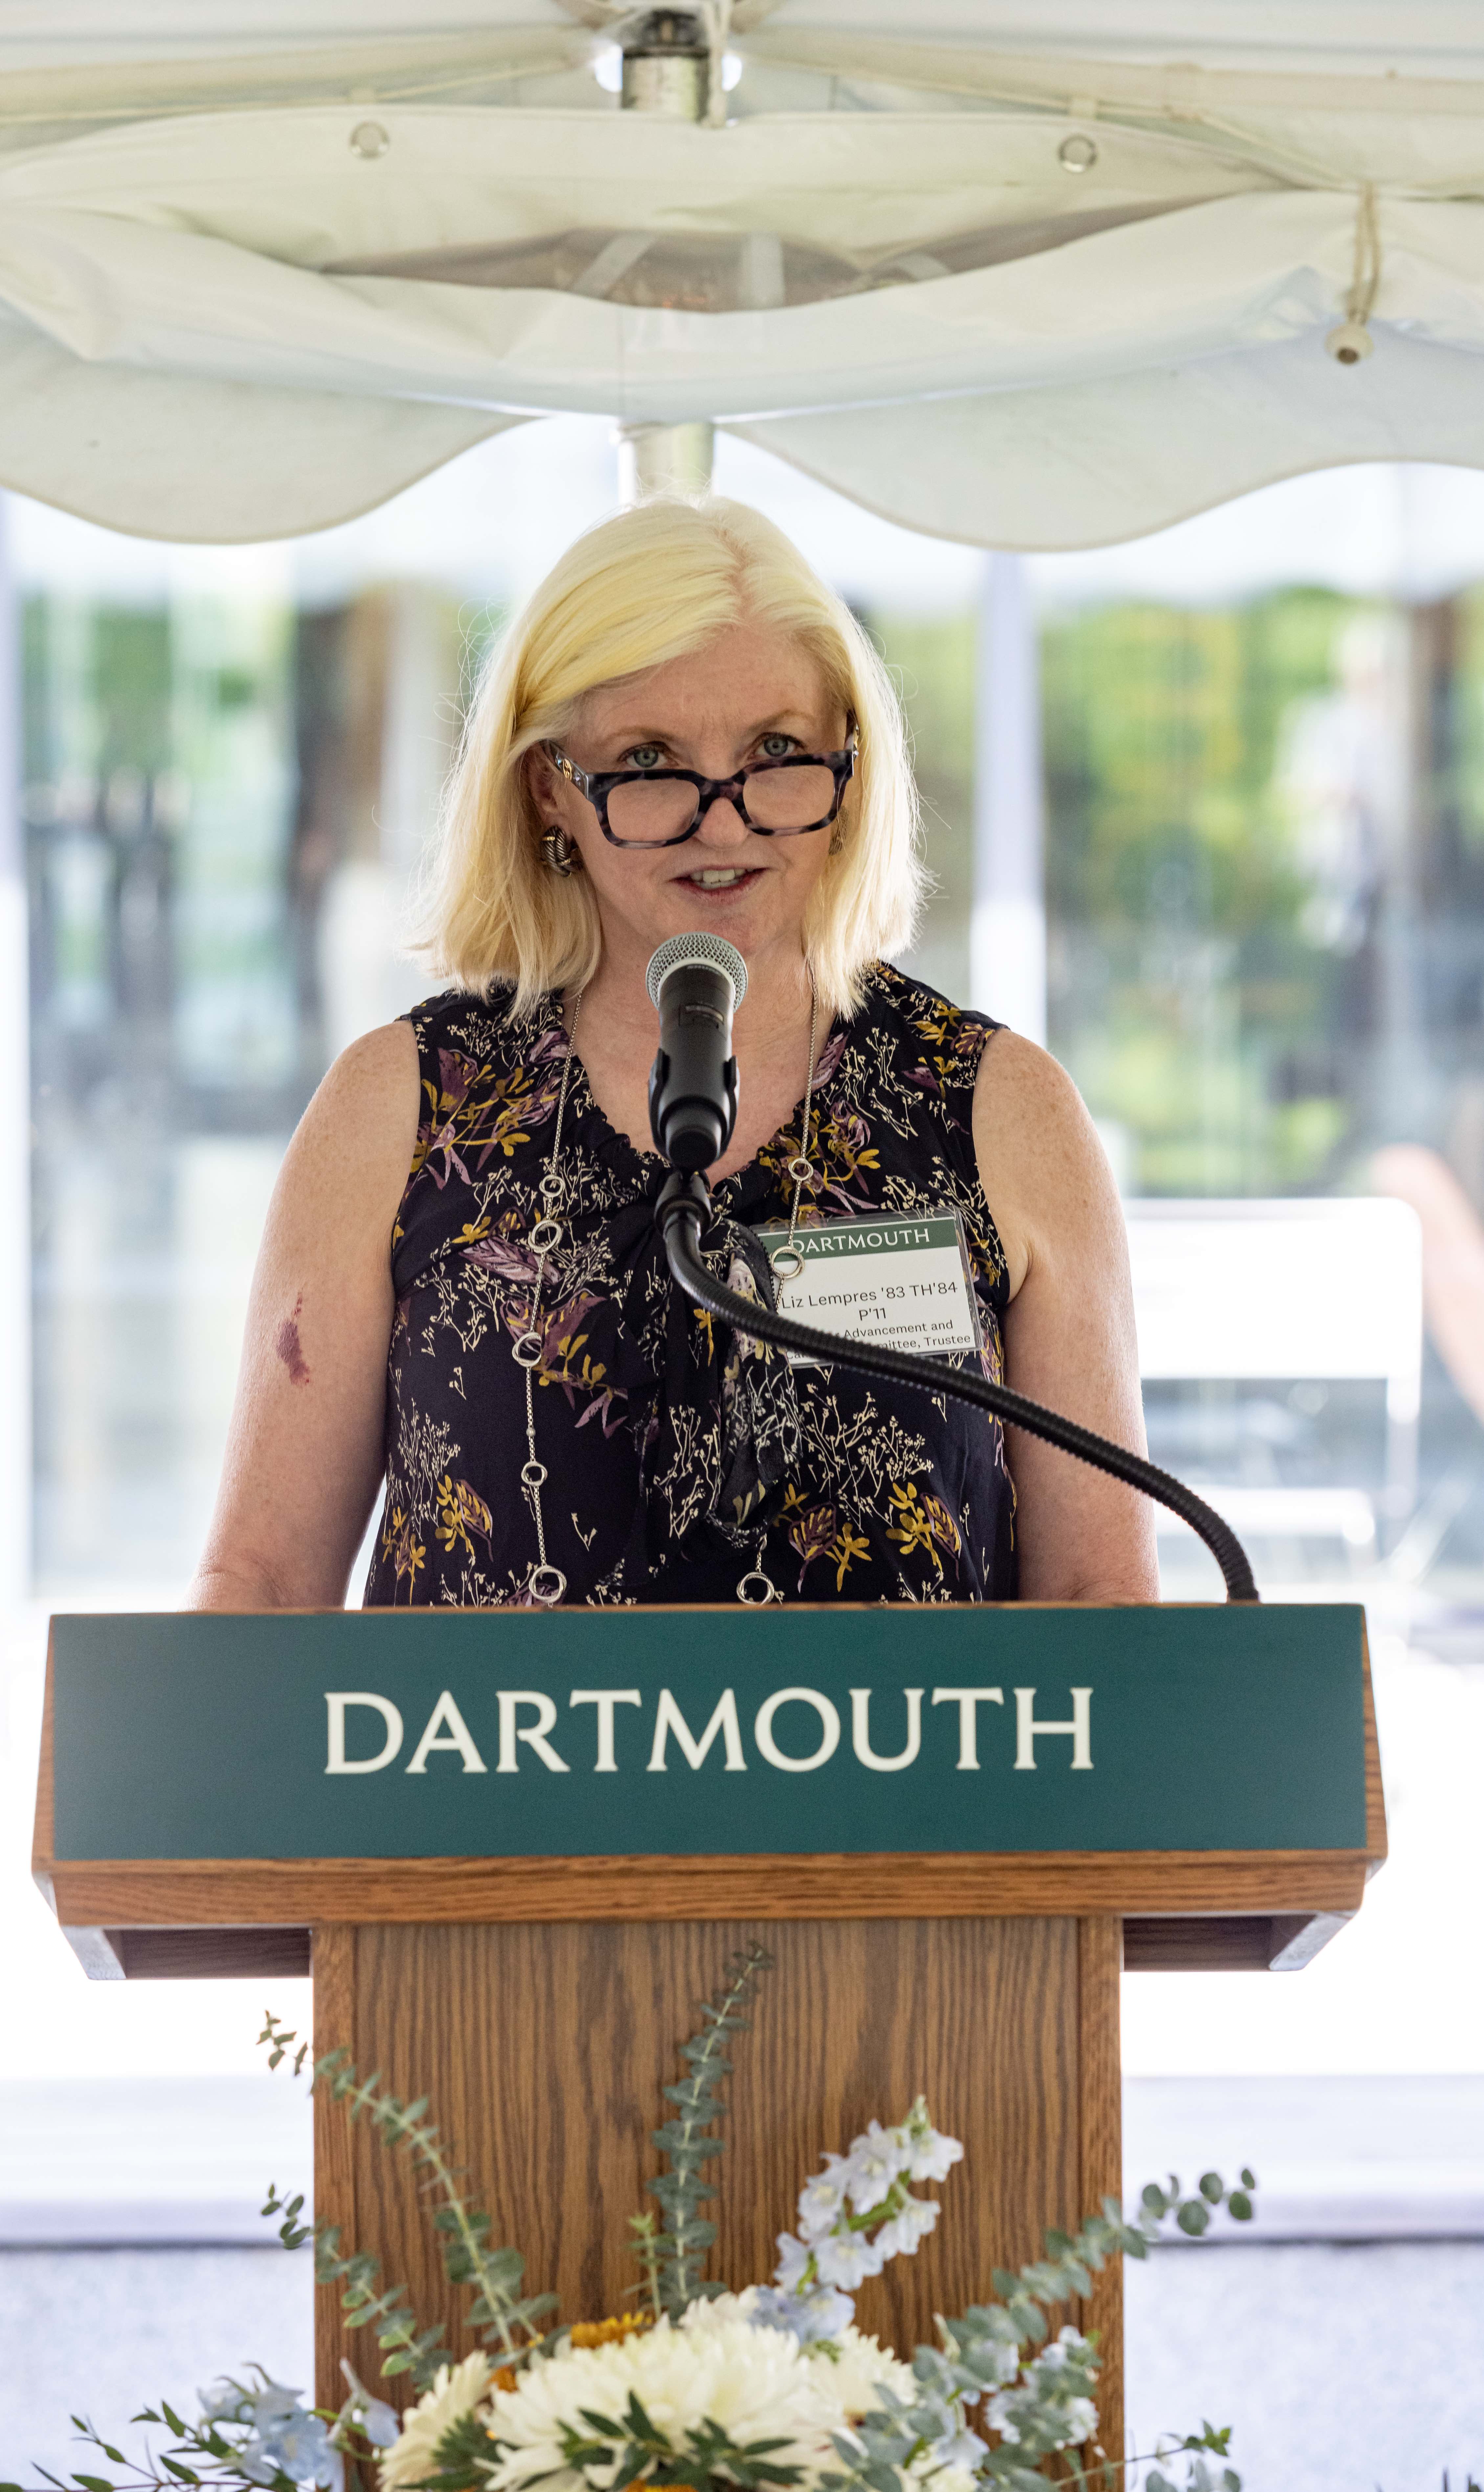 Elizabeth Cahill Lempres ’83 TH’84 is standing behind Dartmouth Podium